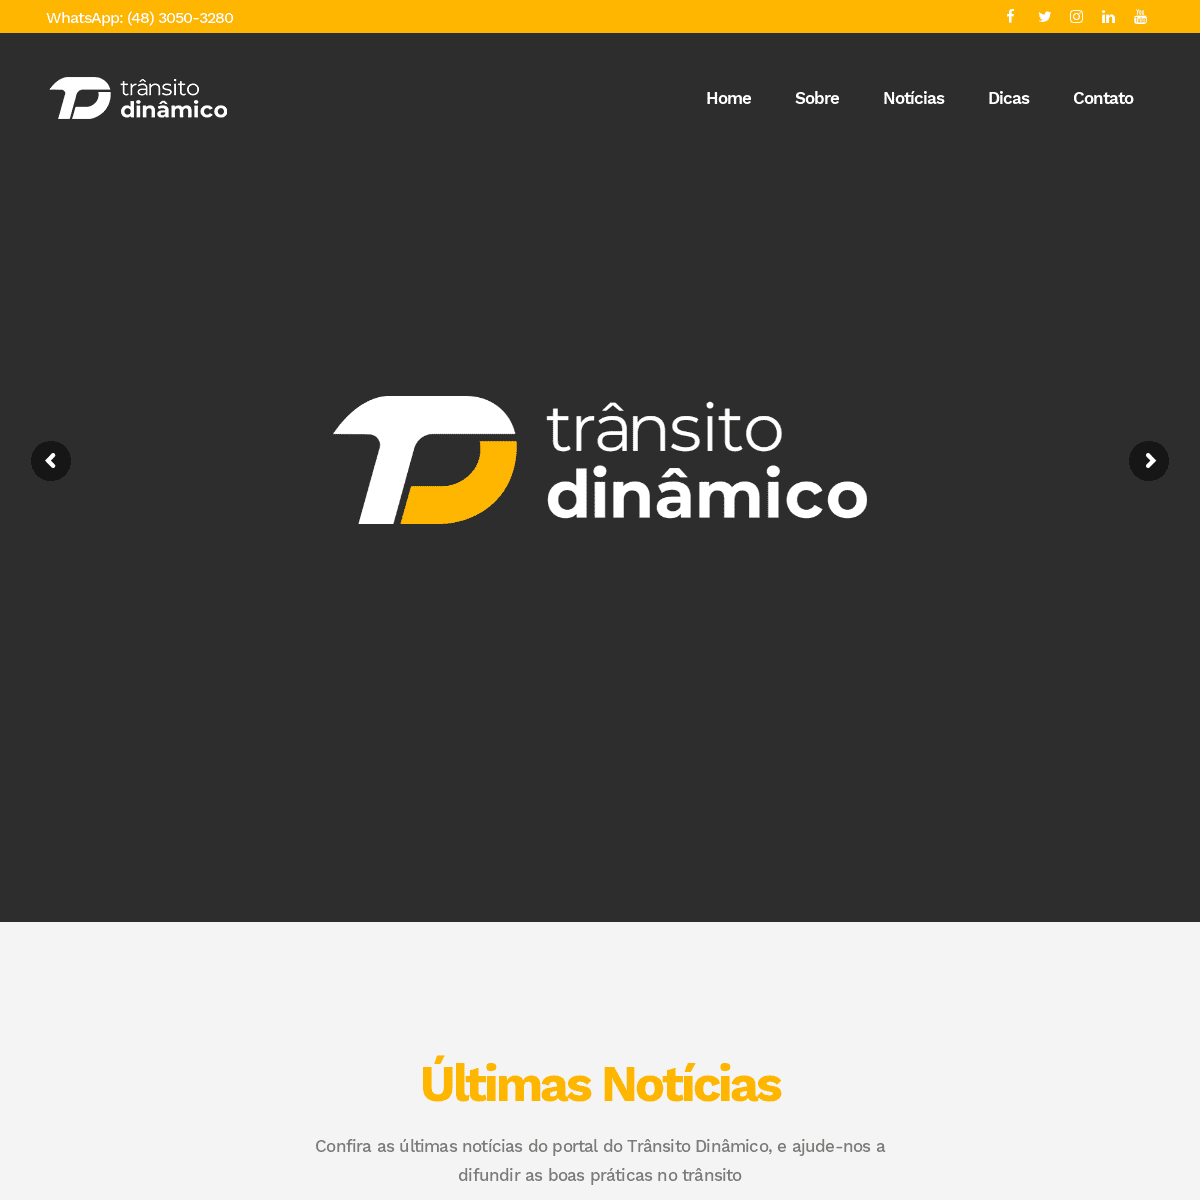 A complete backup of https://transitodinamico.com.br